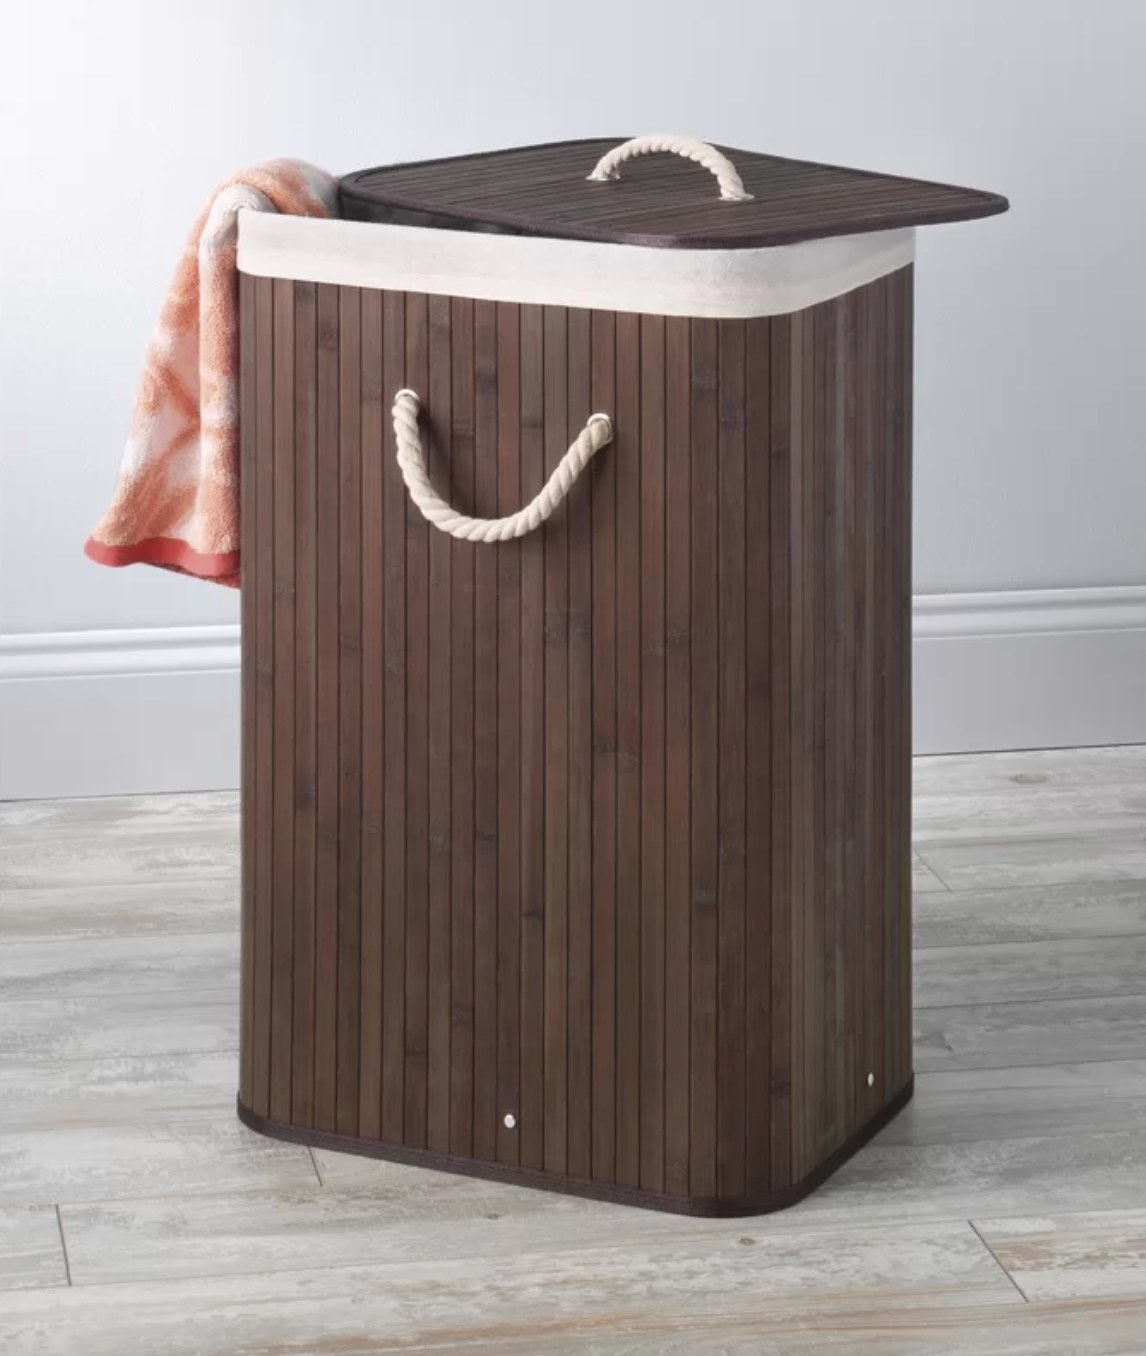 the dark wooden laundry hamper with white rope handles